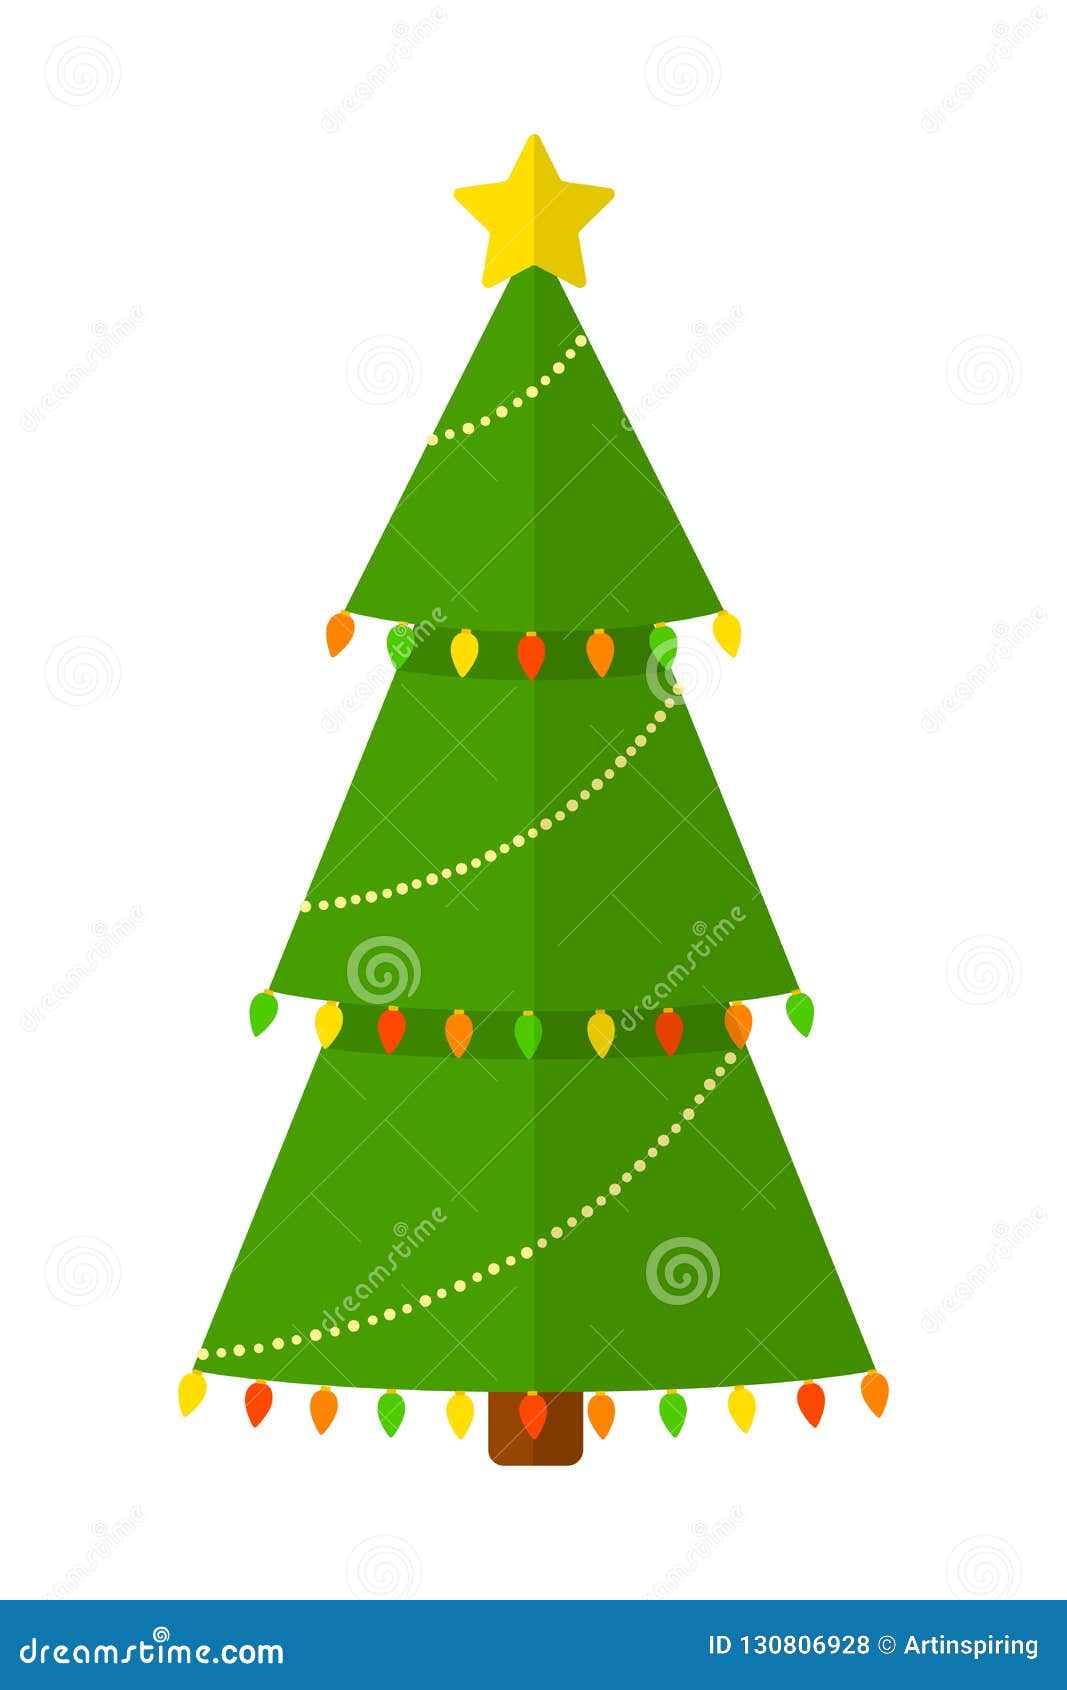 Christmas Green Tree with the Yellowe Star Stock Vector - Illustration ...